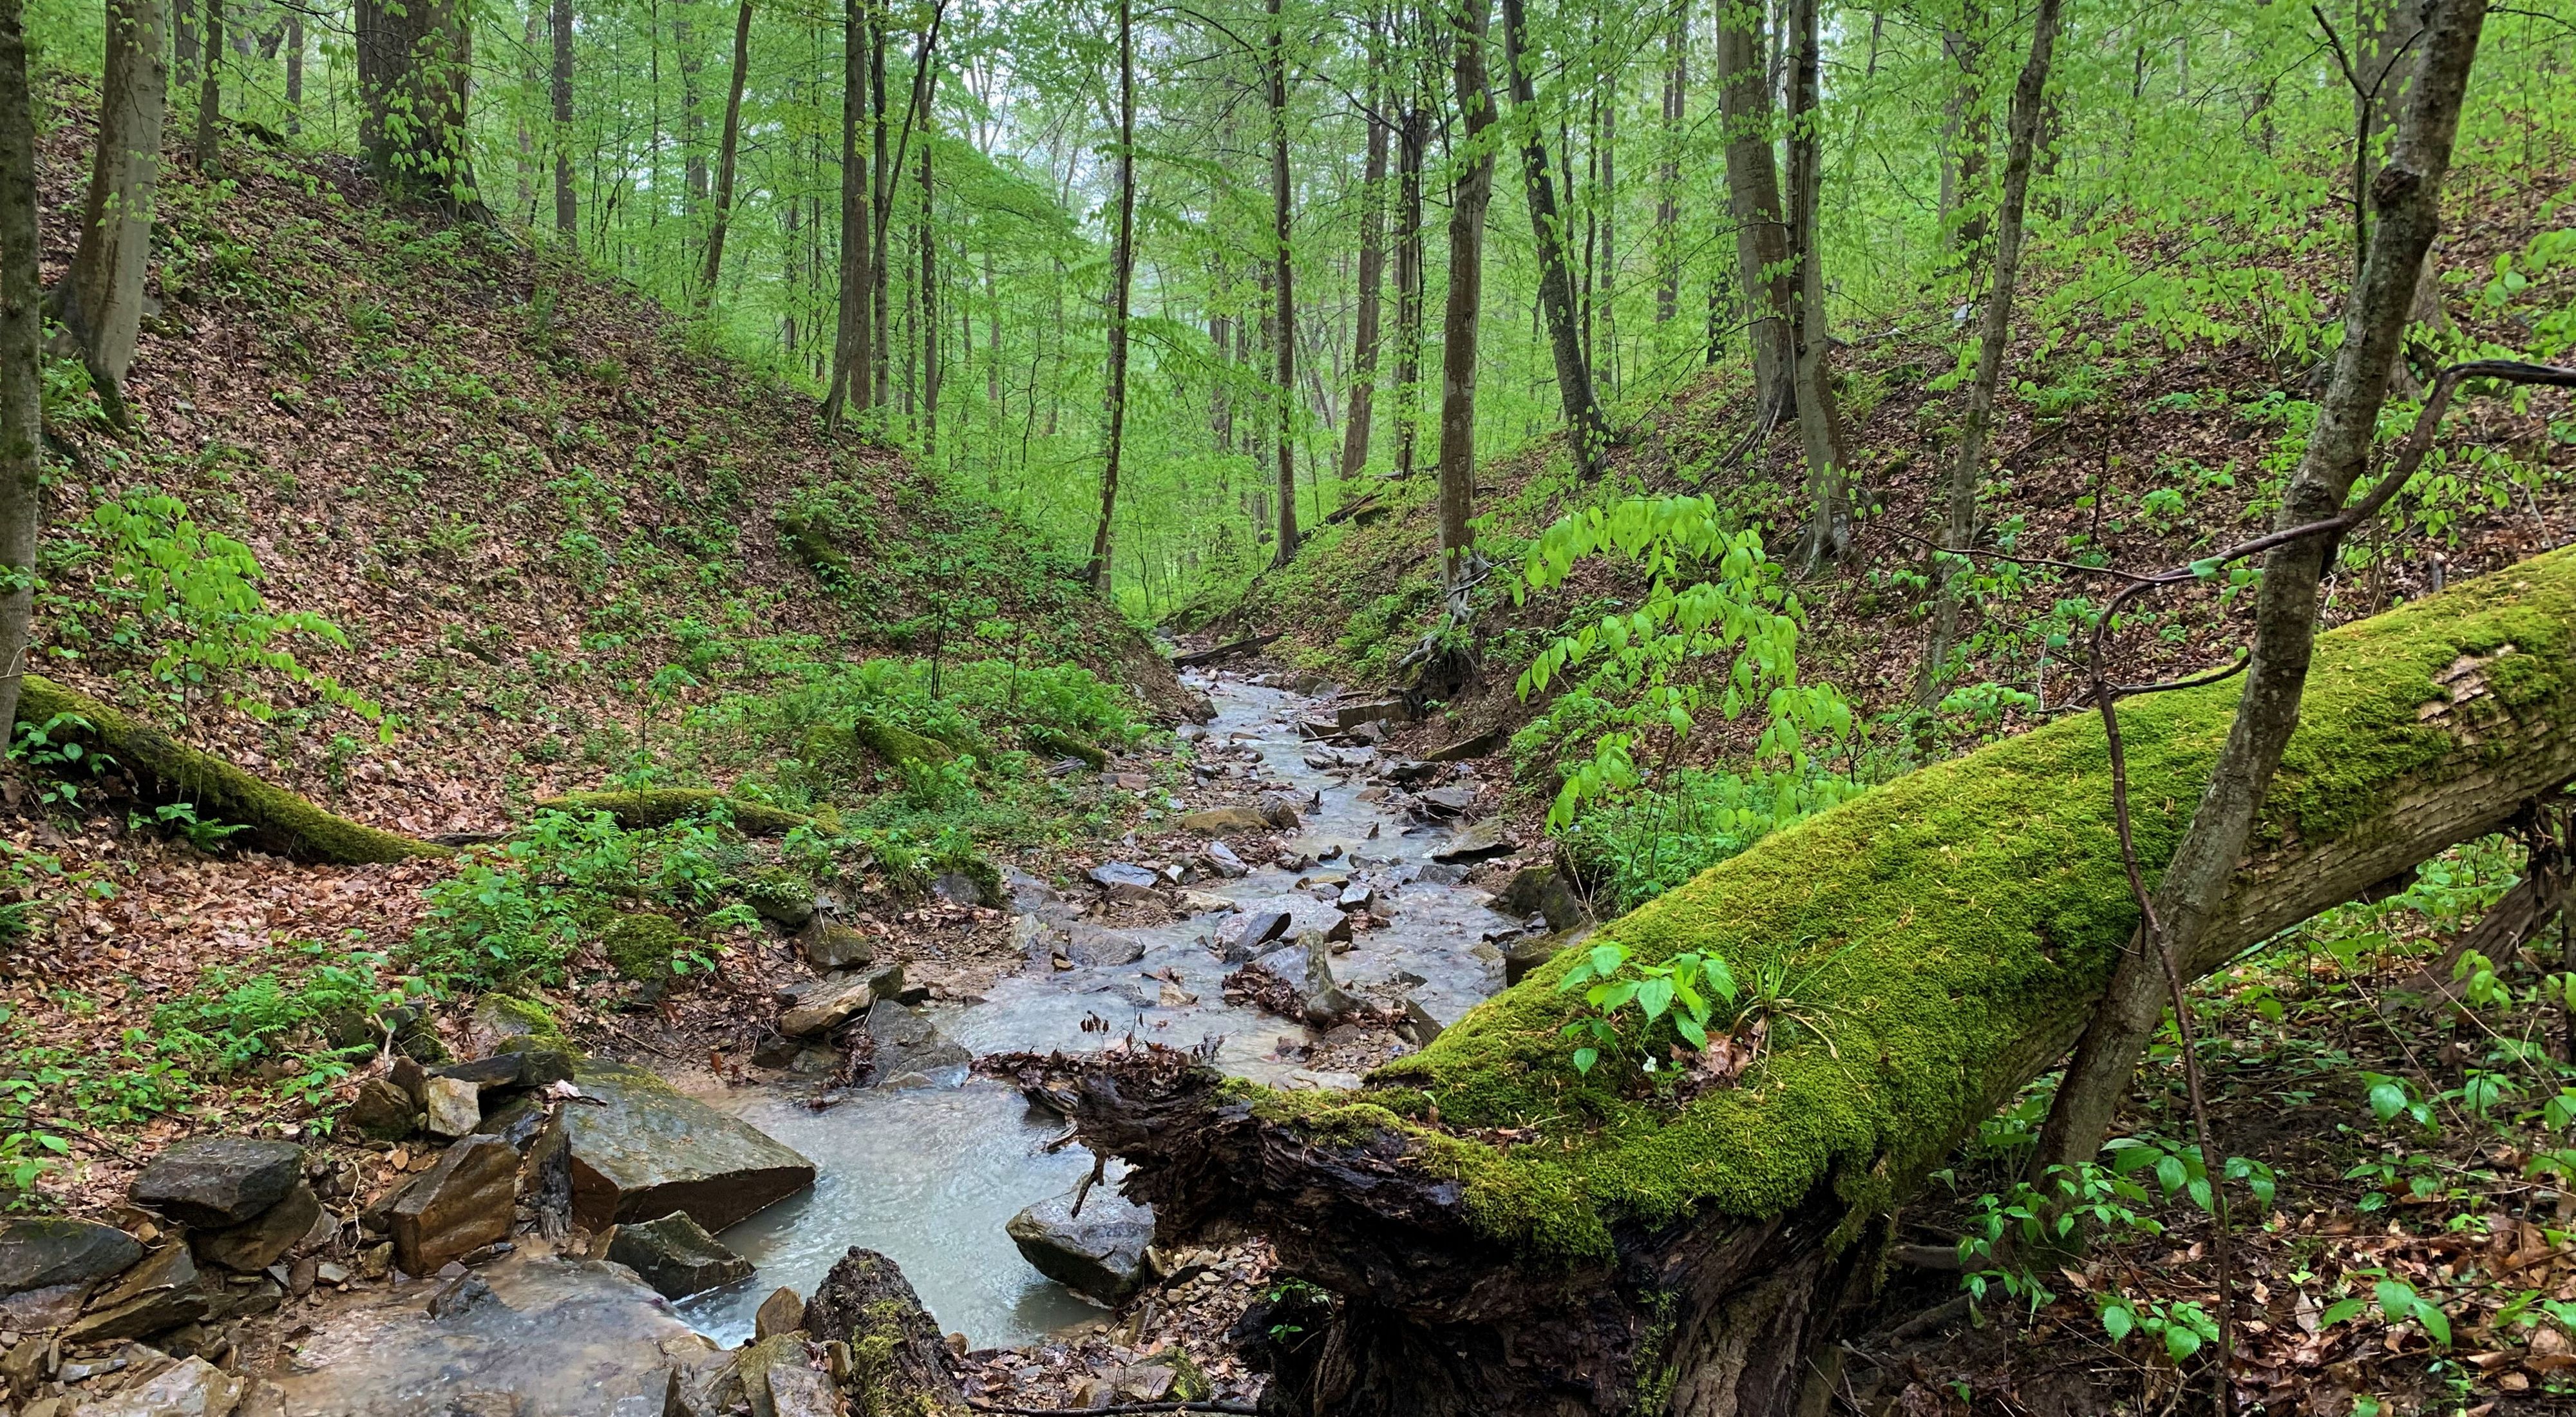 Lush green vegetation surrounds stream in forest.